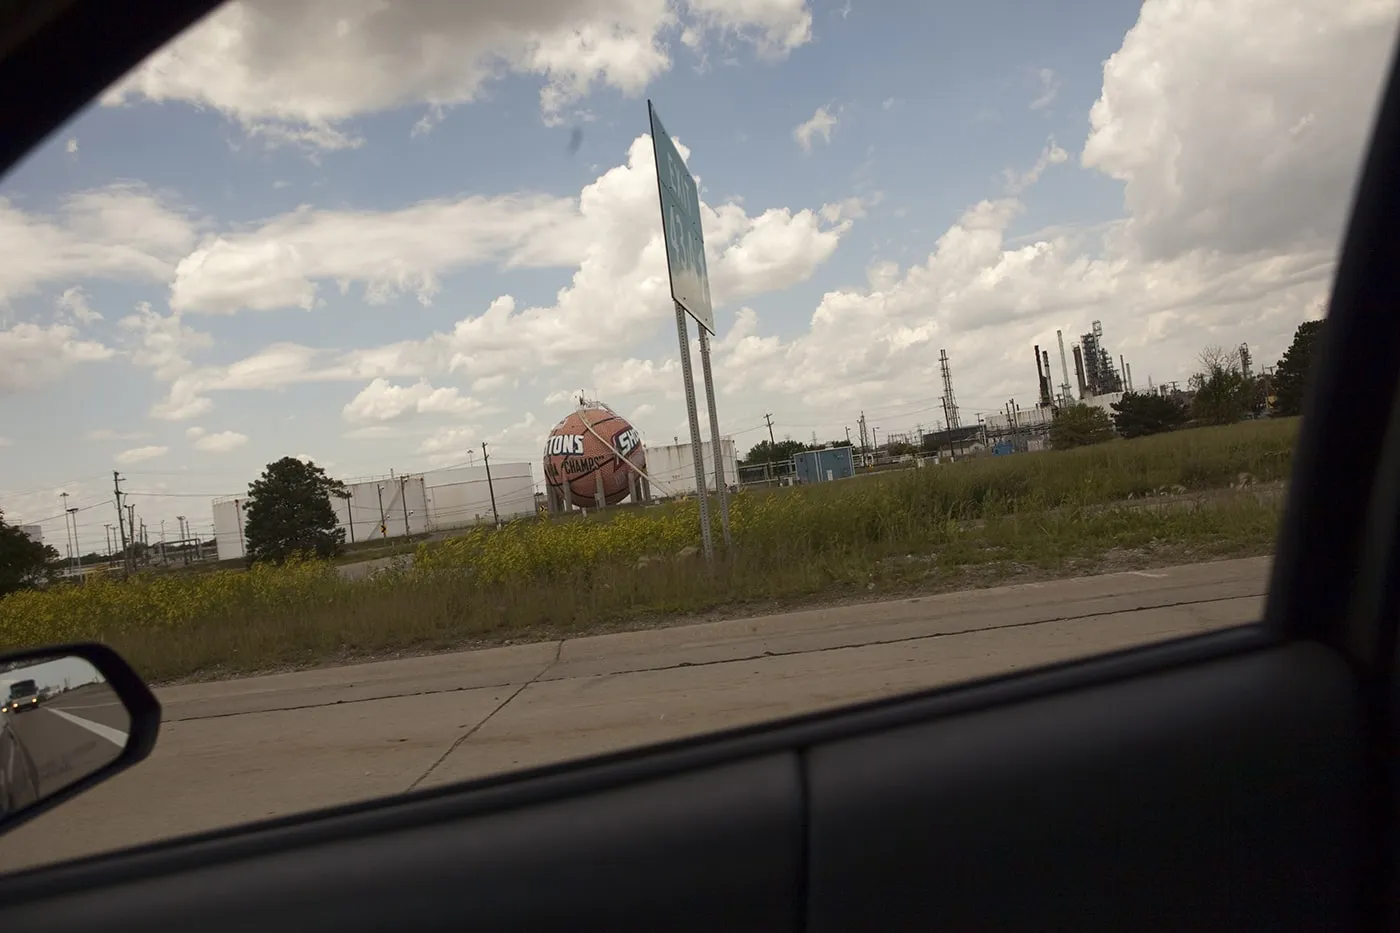 Giant basketball painted with the Detroit Pistons and WNBA Detroit Shock team logos, outside of Detroit, Michigan.